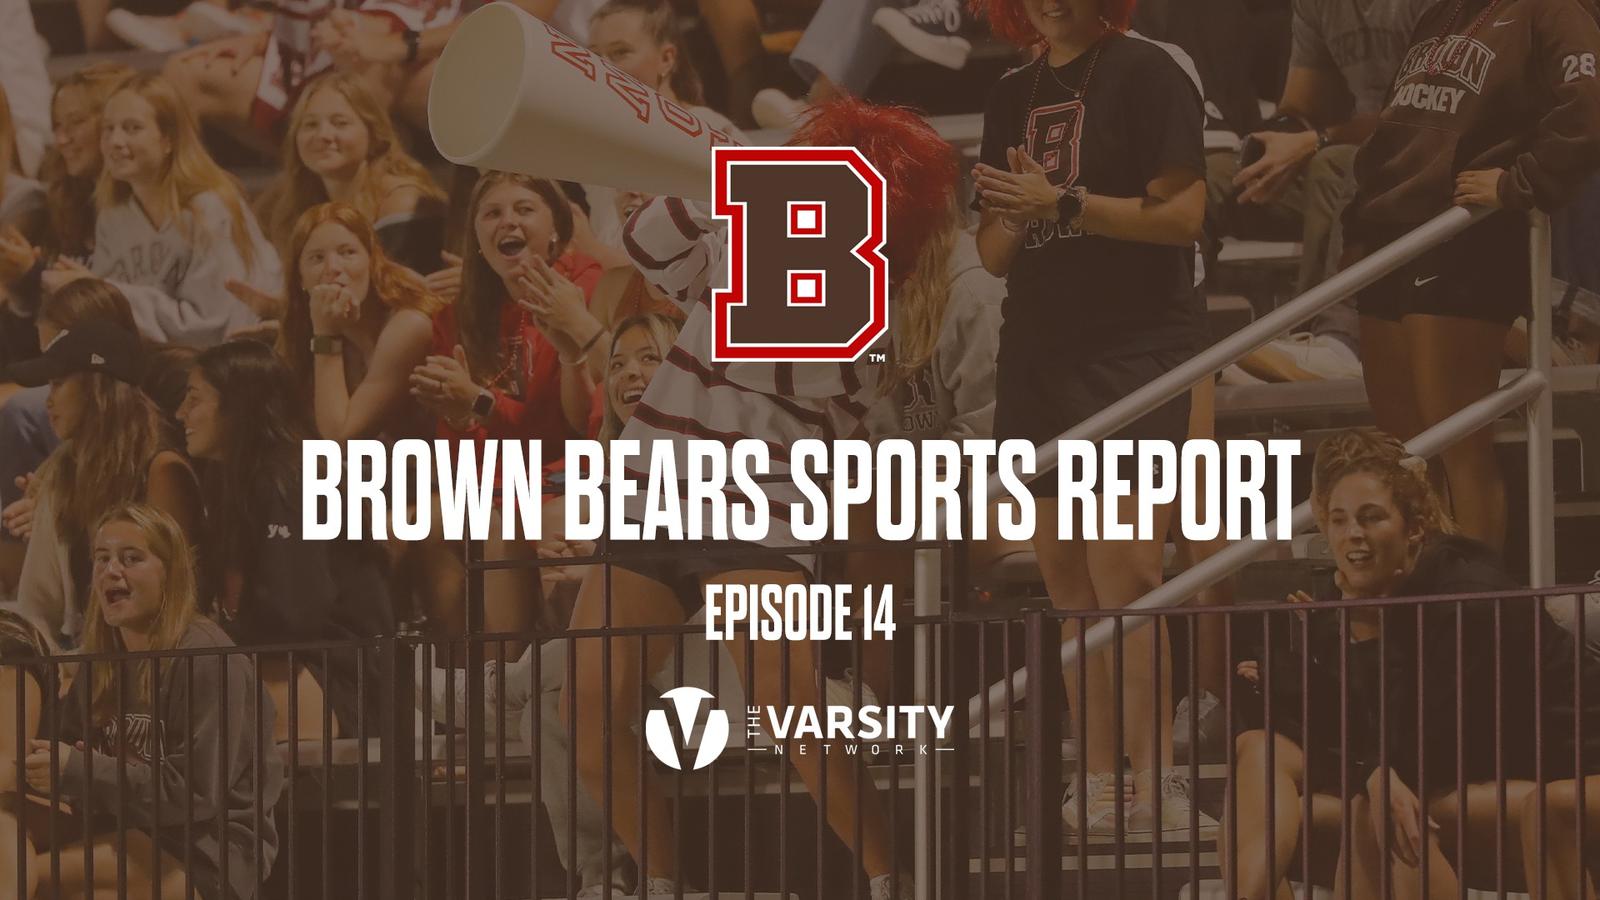 Episode 14 of the Brown Bears Sports Report